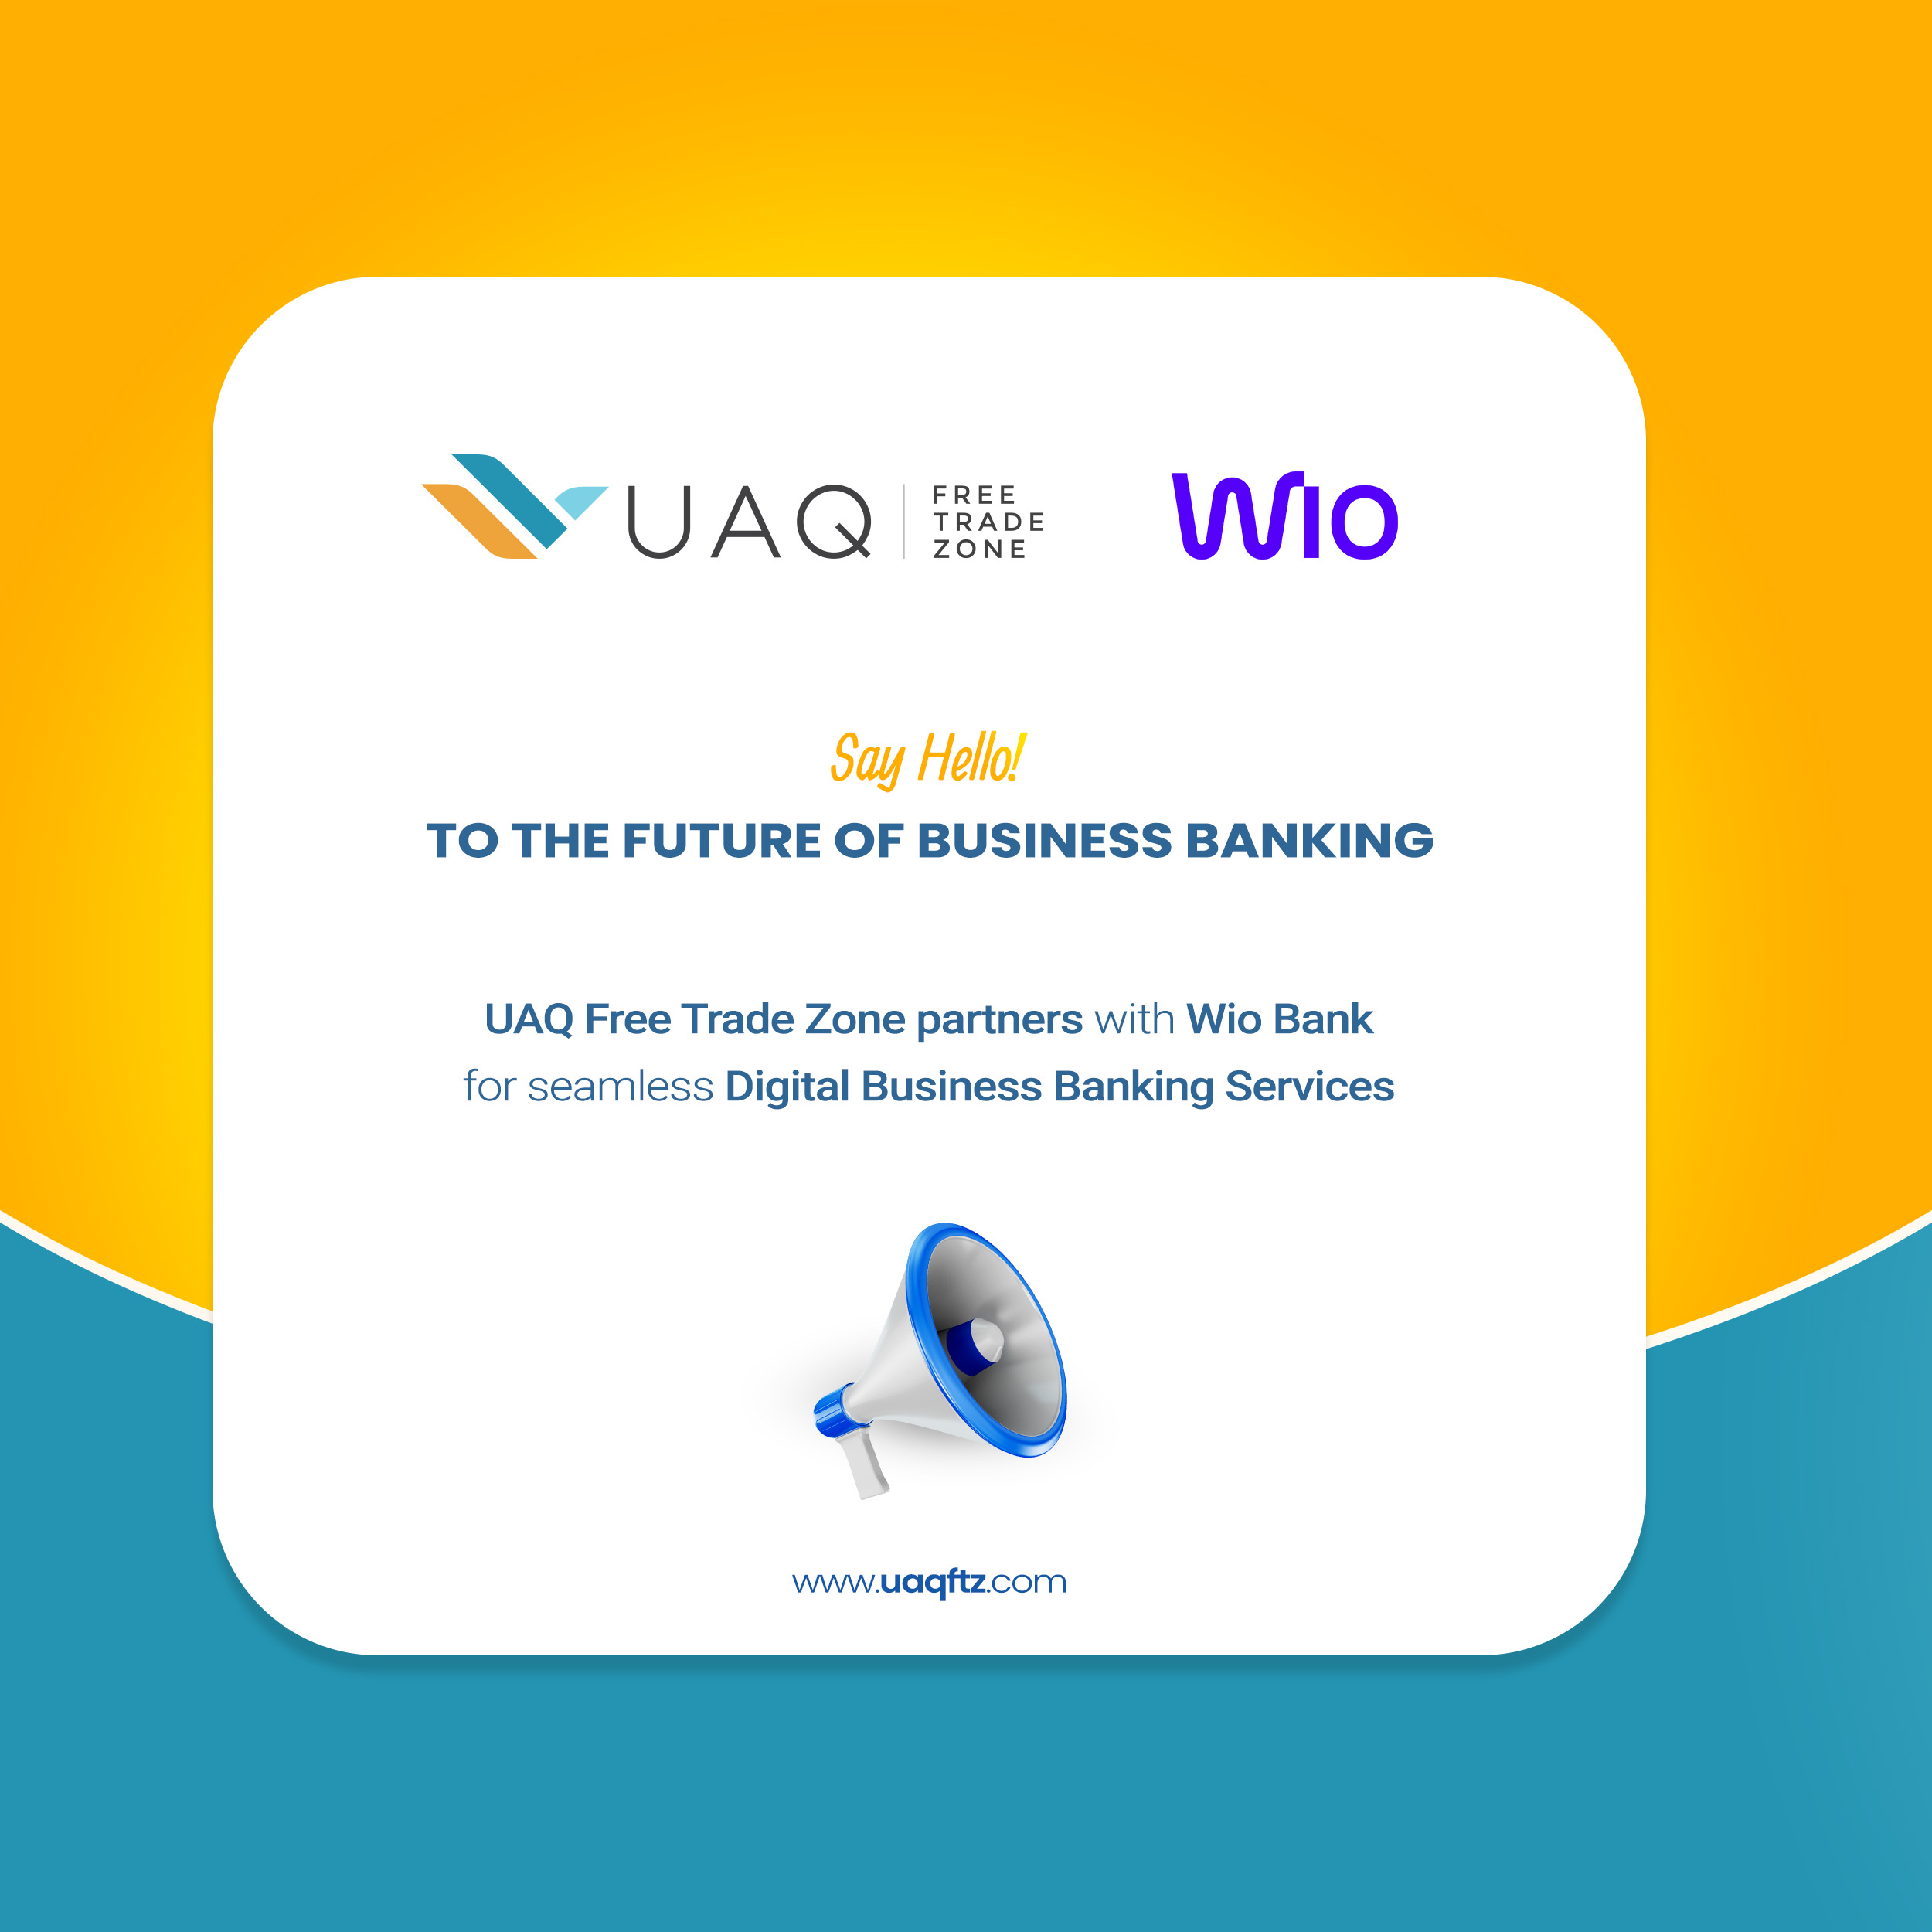 UAQ FTZ partners with Wio Bank for seamless digital banking services